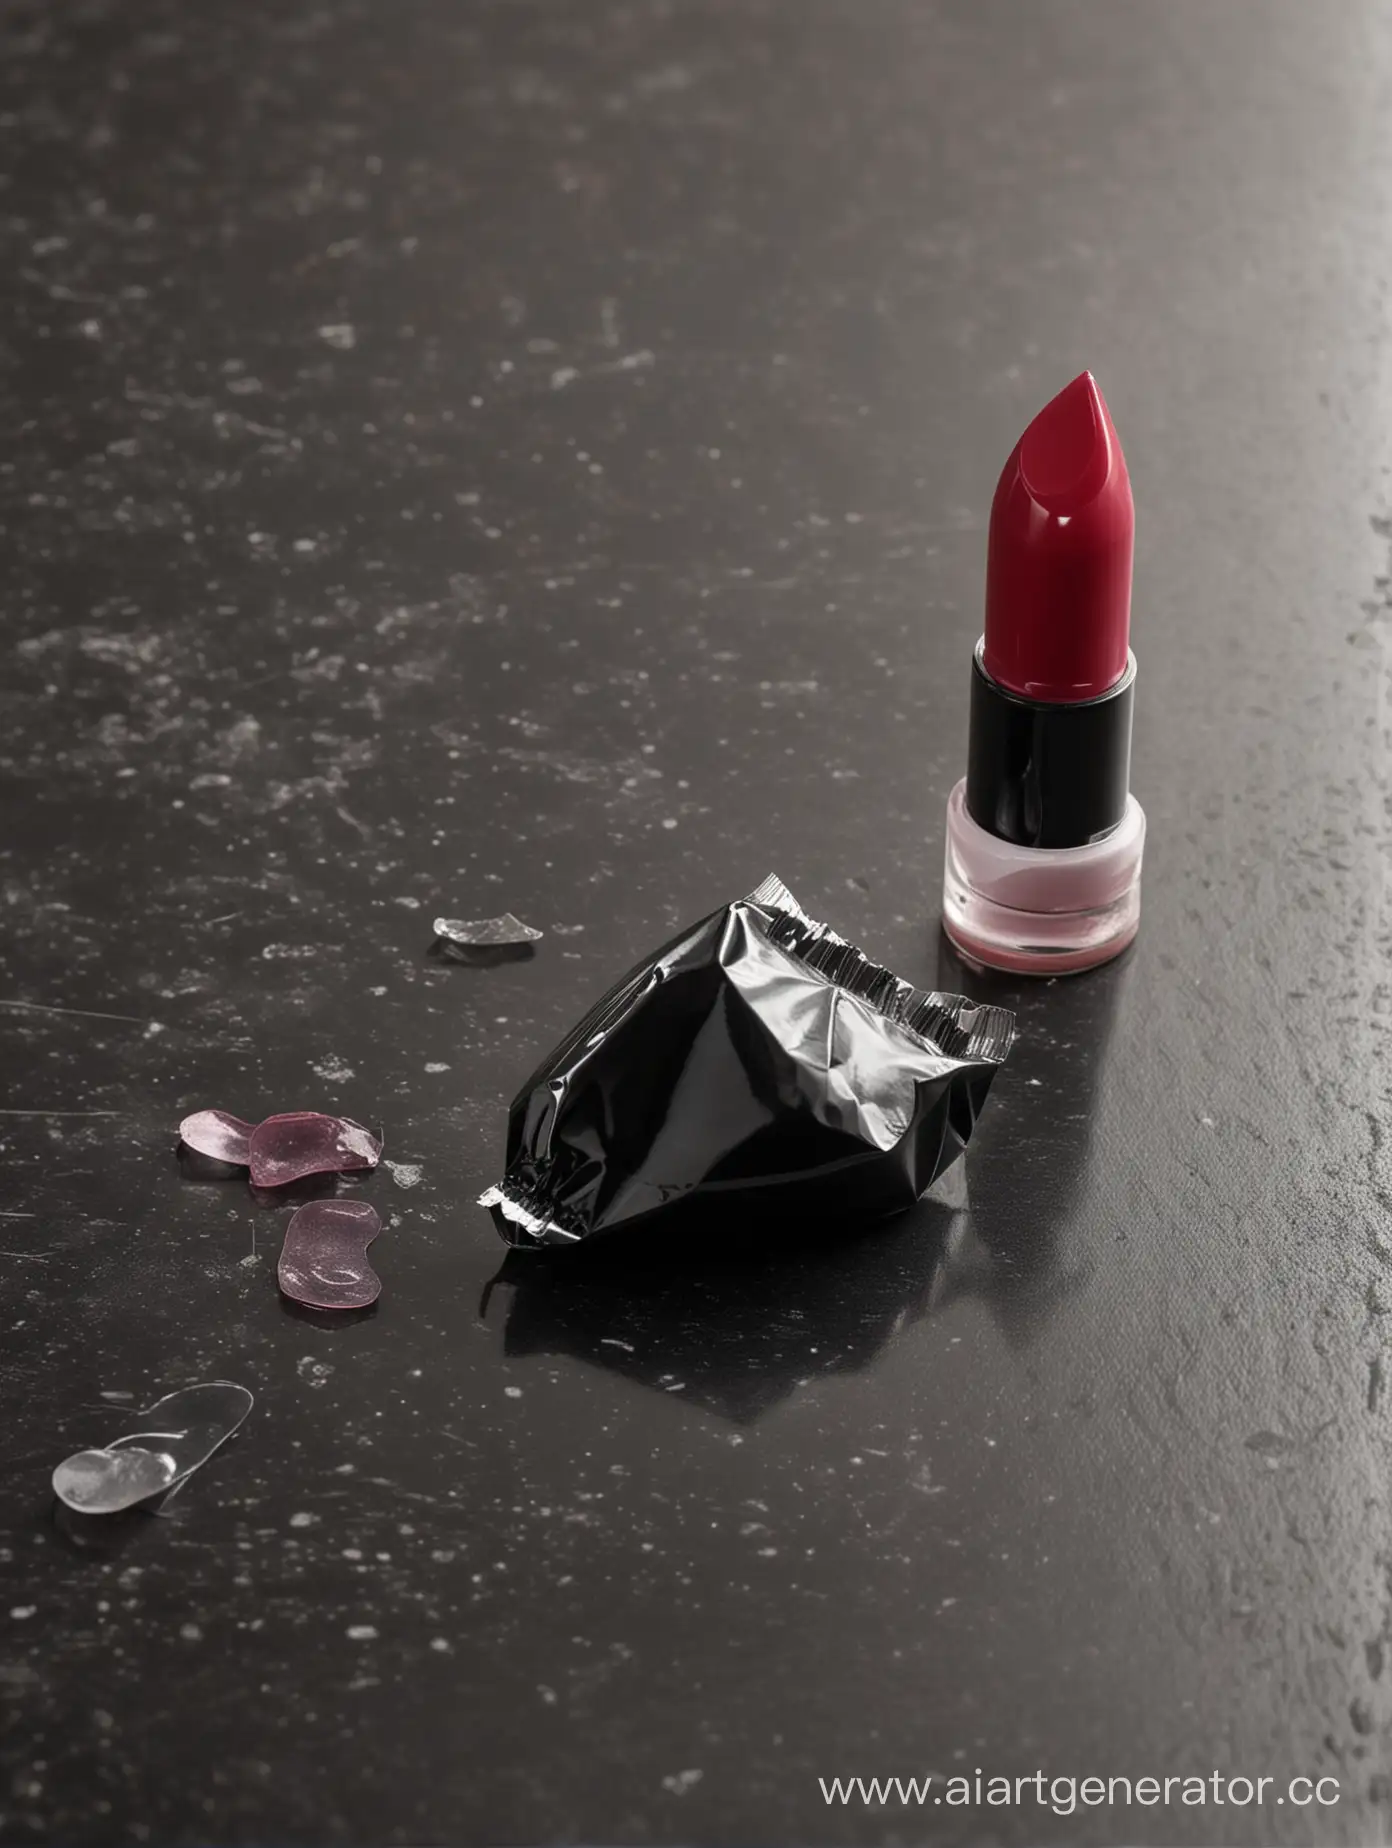 CloseUp-Side-View-of-Lying-Used-Condom-on-Black-Polished-Countertop-with-Lipstick